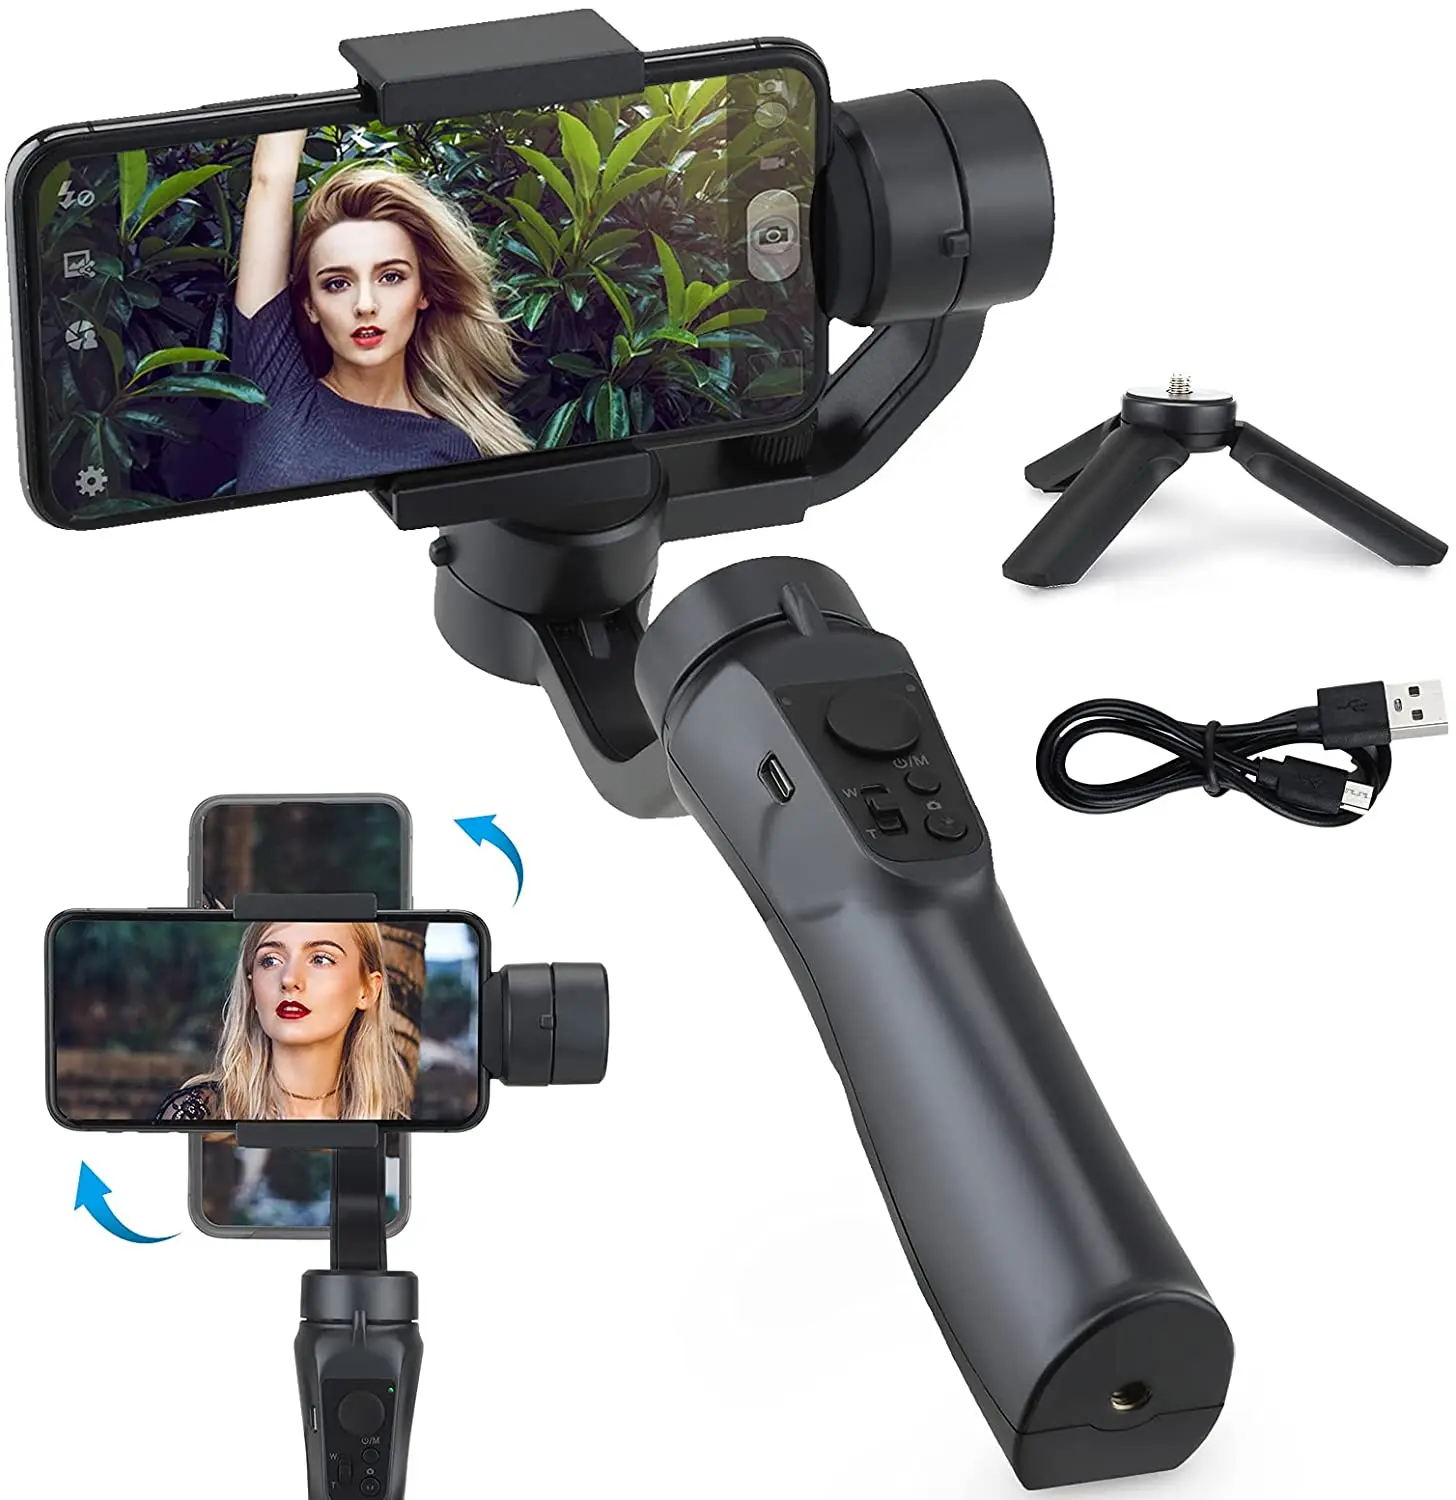 

Stable Shooting And Anti-shake Handheld Mobile 3 Axis Gimbal Stabilizer For Smartphone